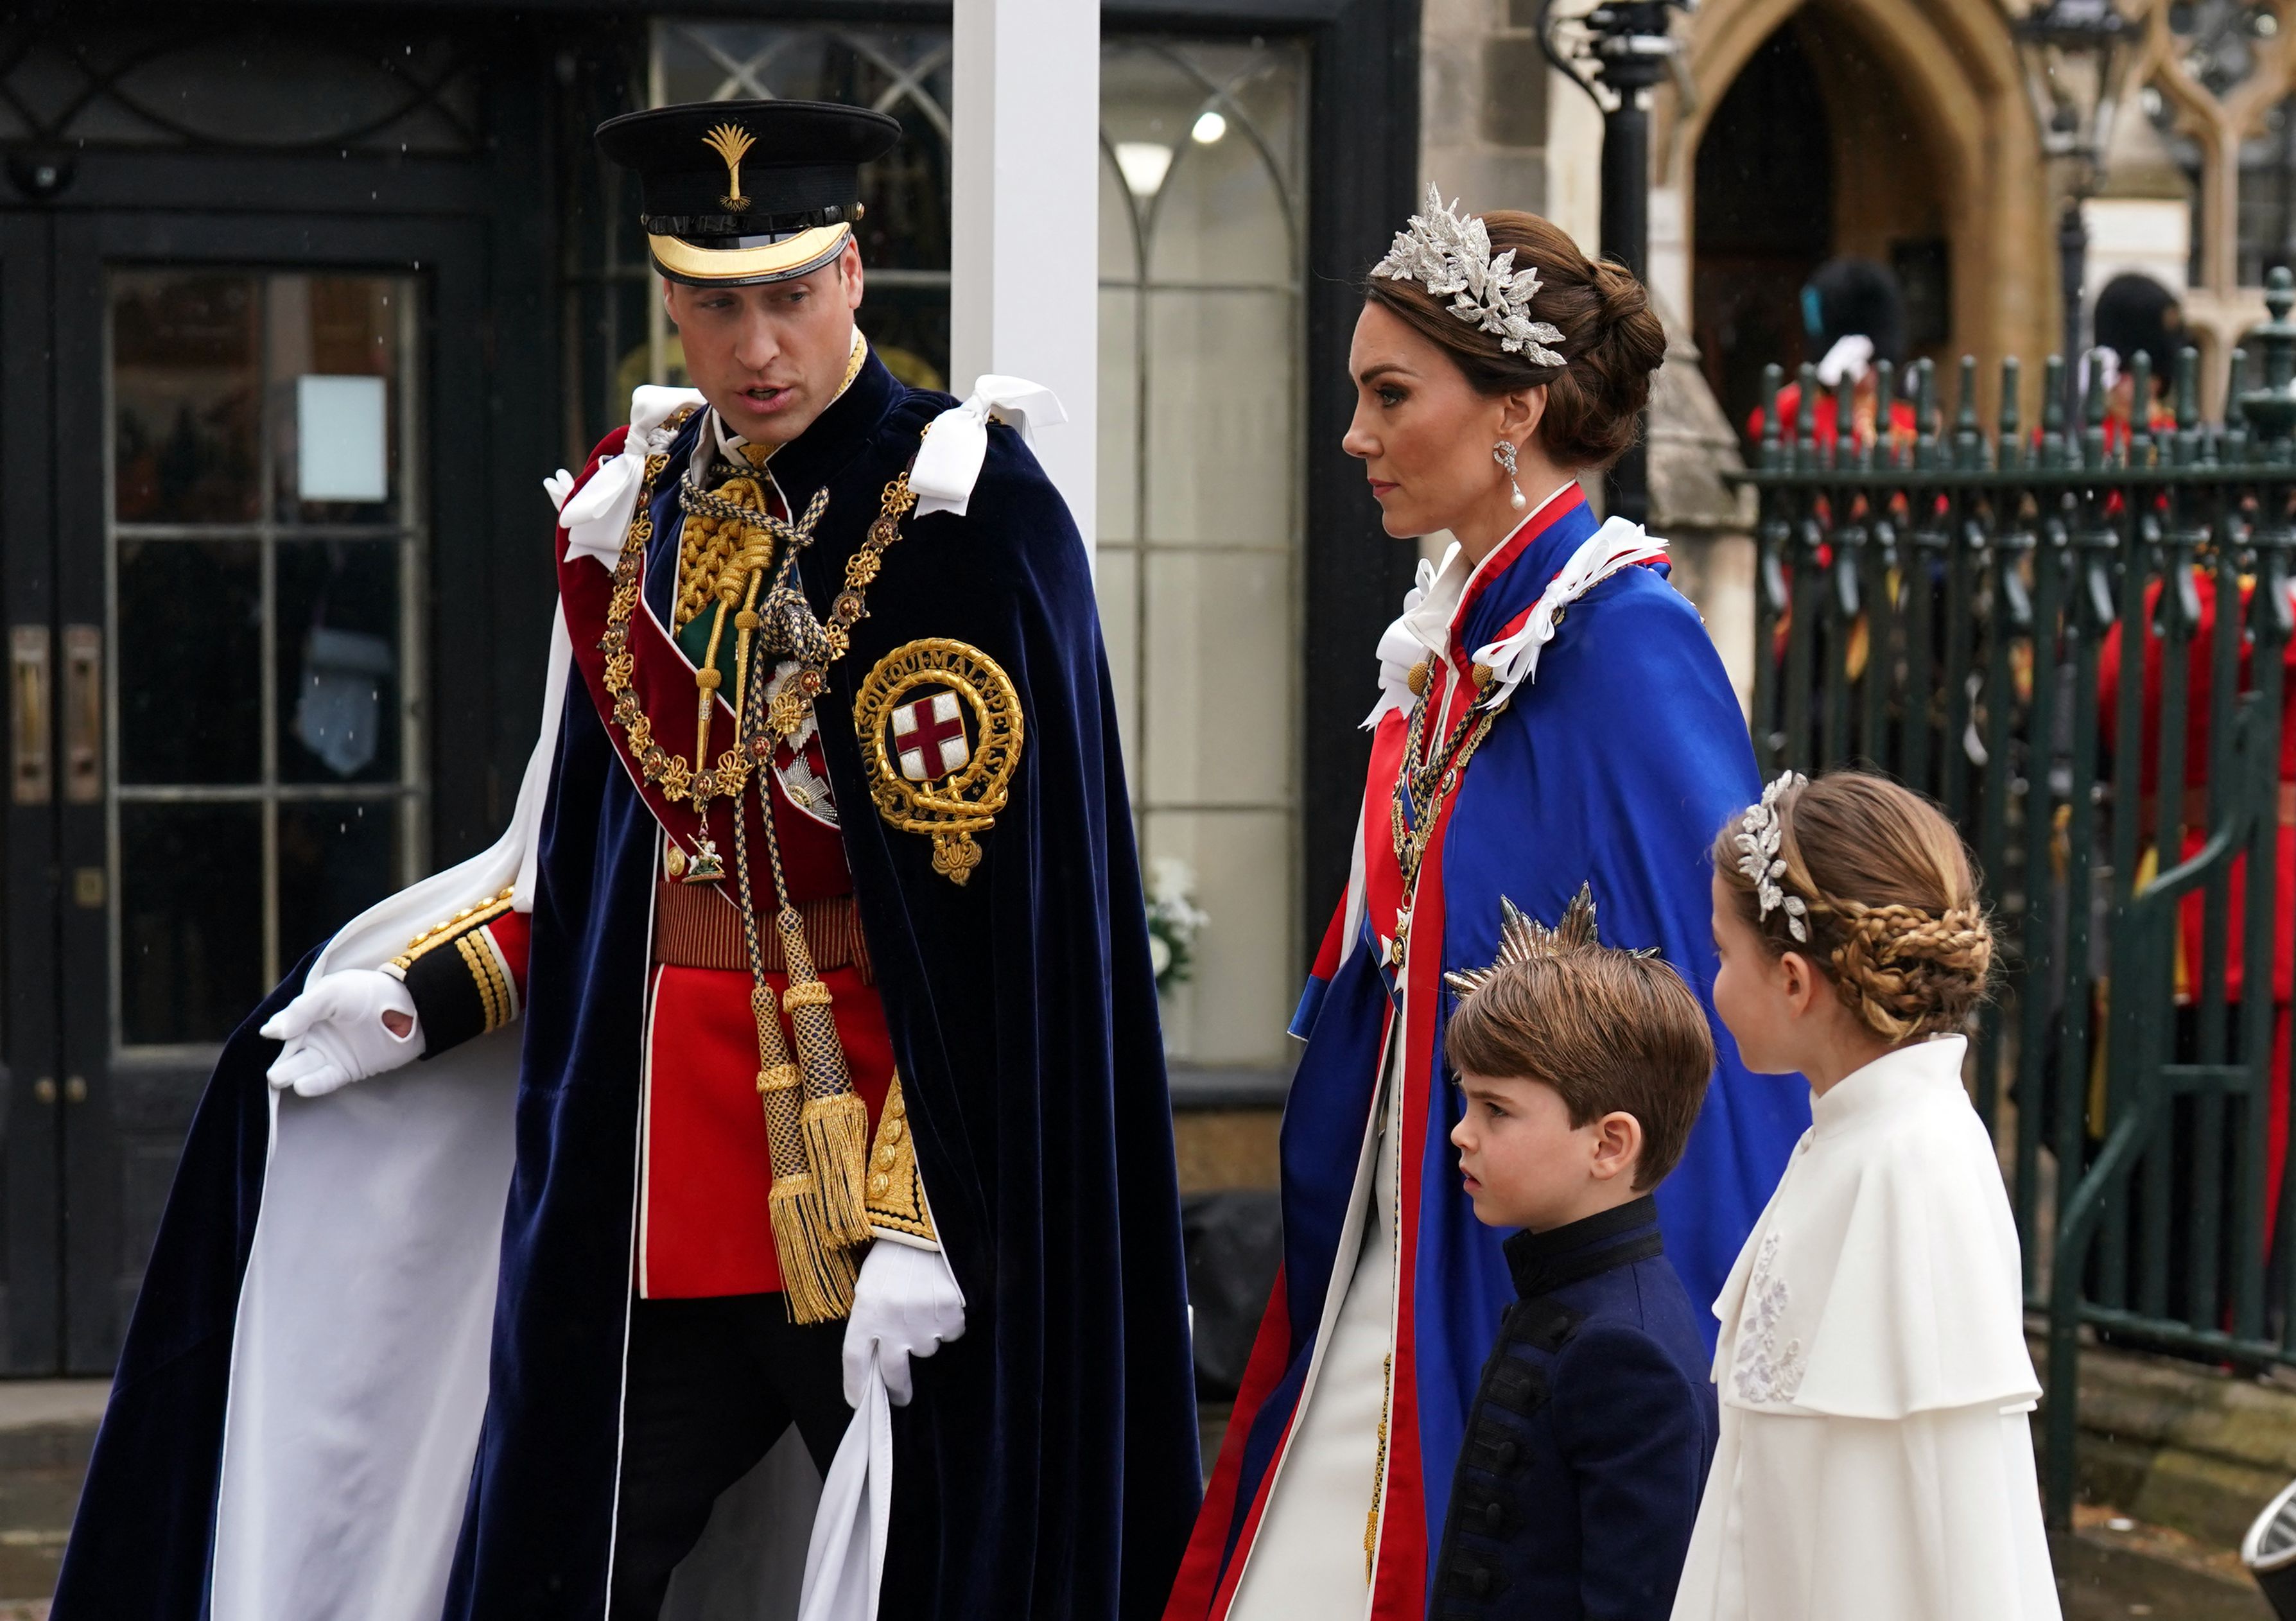 King Charles' eldest son Prince William (who will succeed Charles) along with his wife Kate Middleton, daughter Princess Charley and son Prince Louis are arriving for the coronation ceremony.